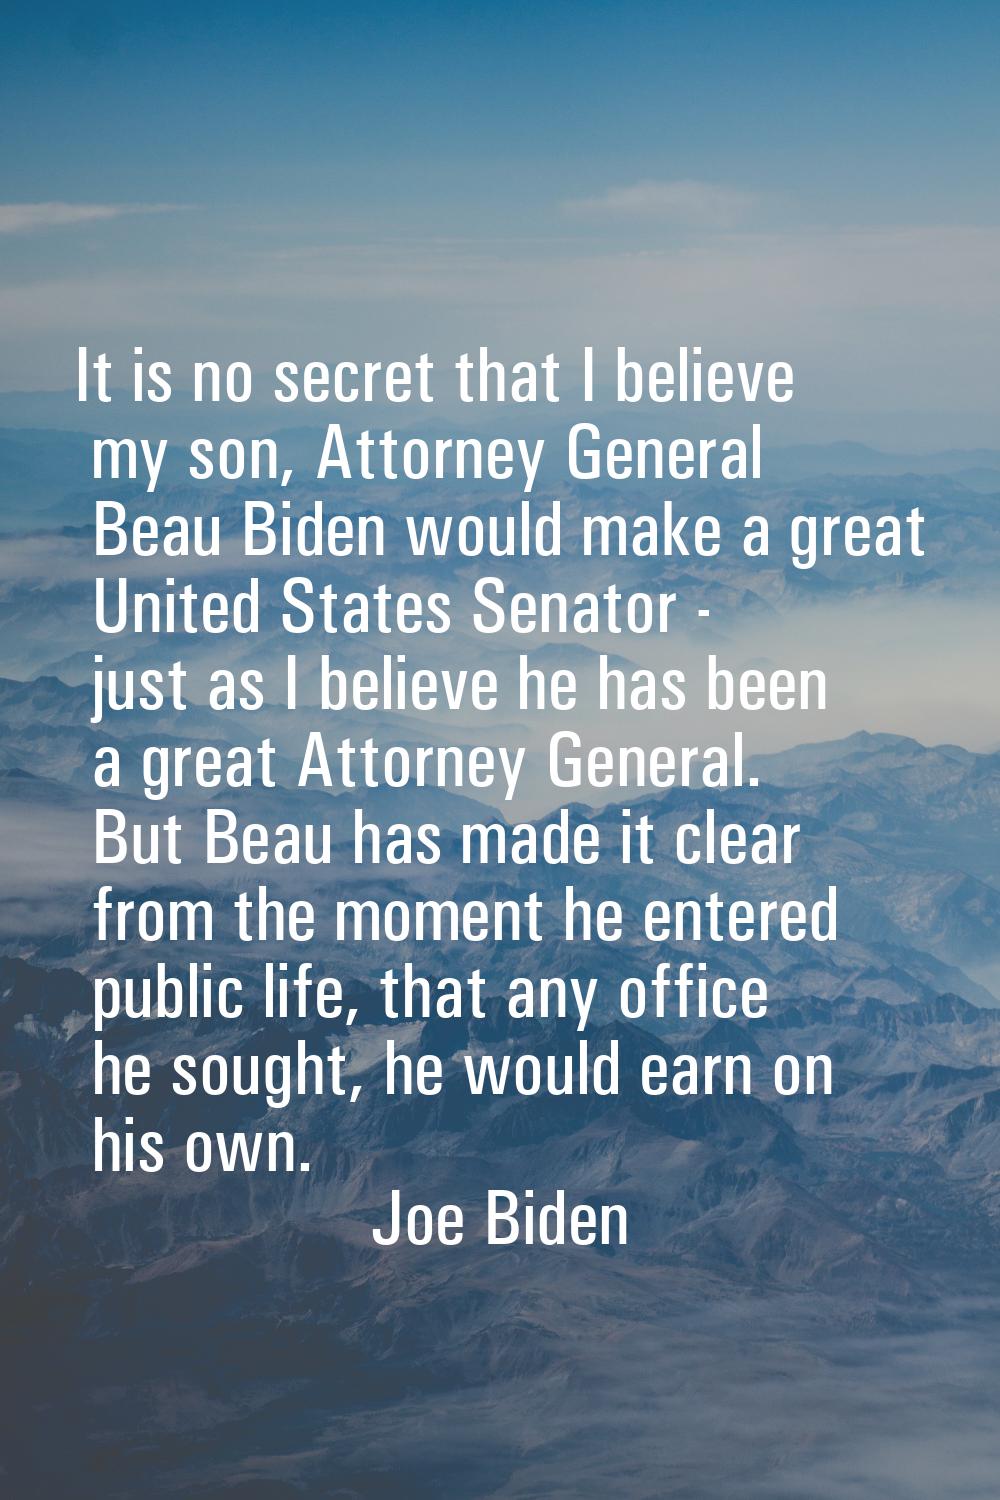 It is no secret that I believe my son, Attorney General Beau Biden would make a great United States